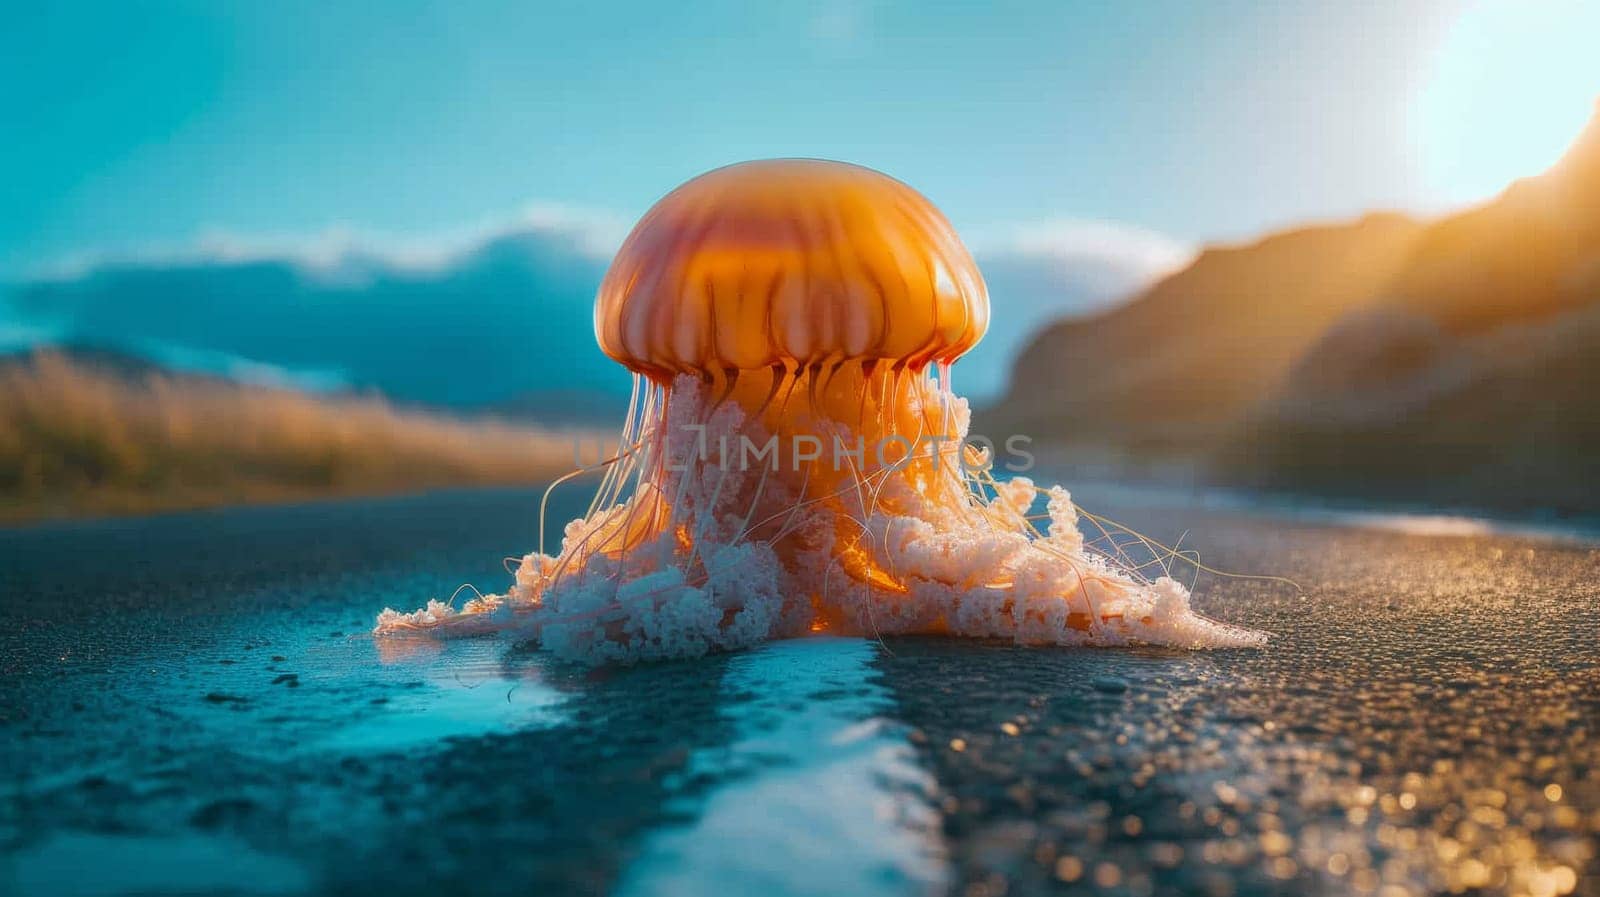 A jellyfish is sitting on the road in front of a car